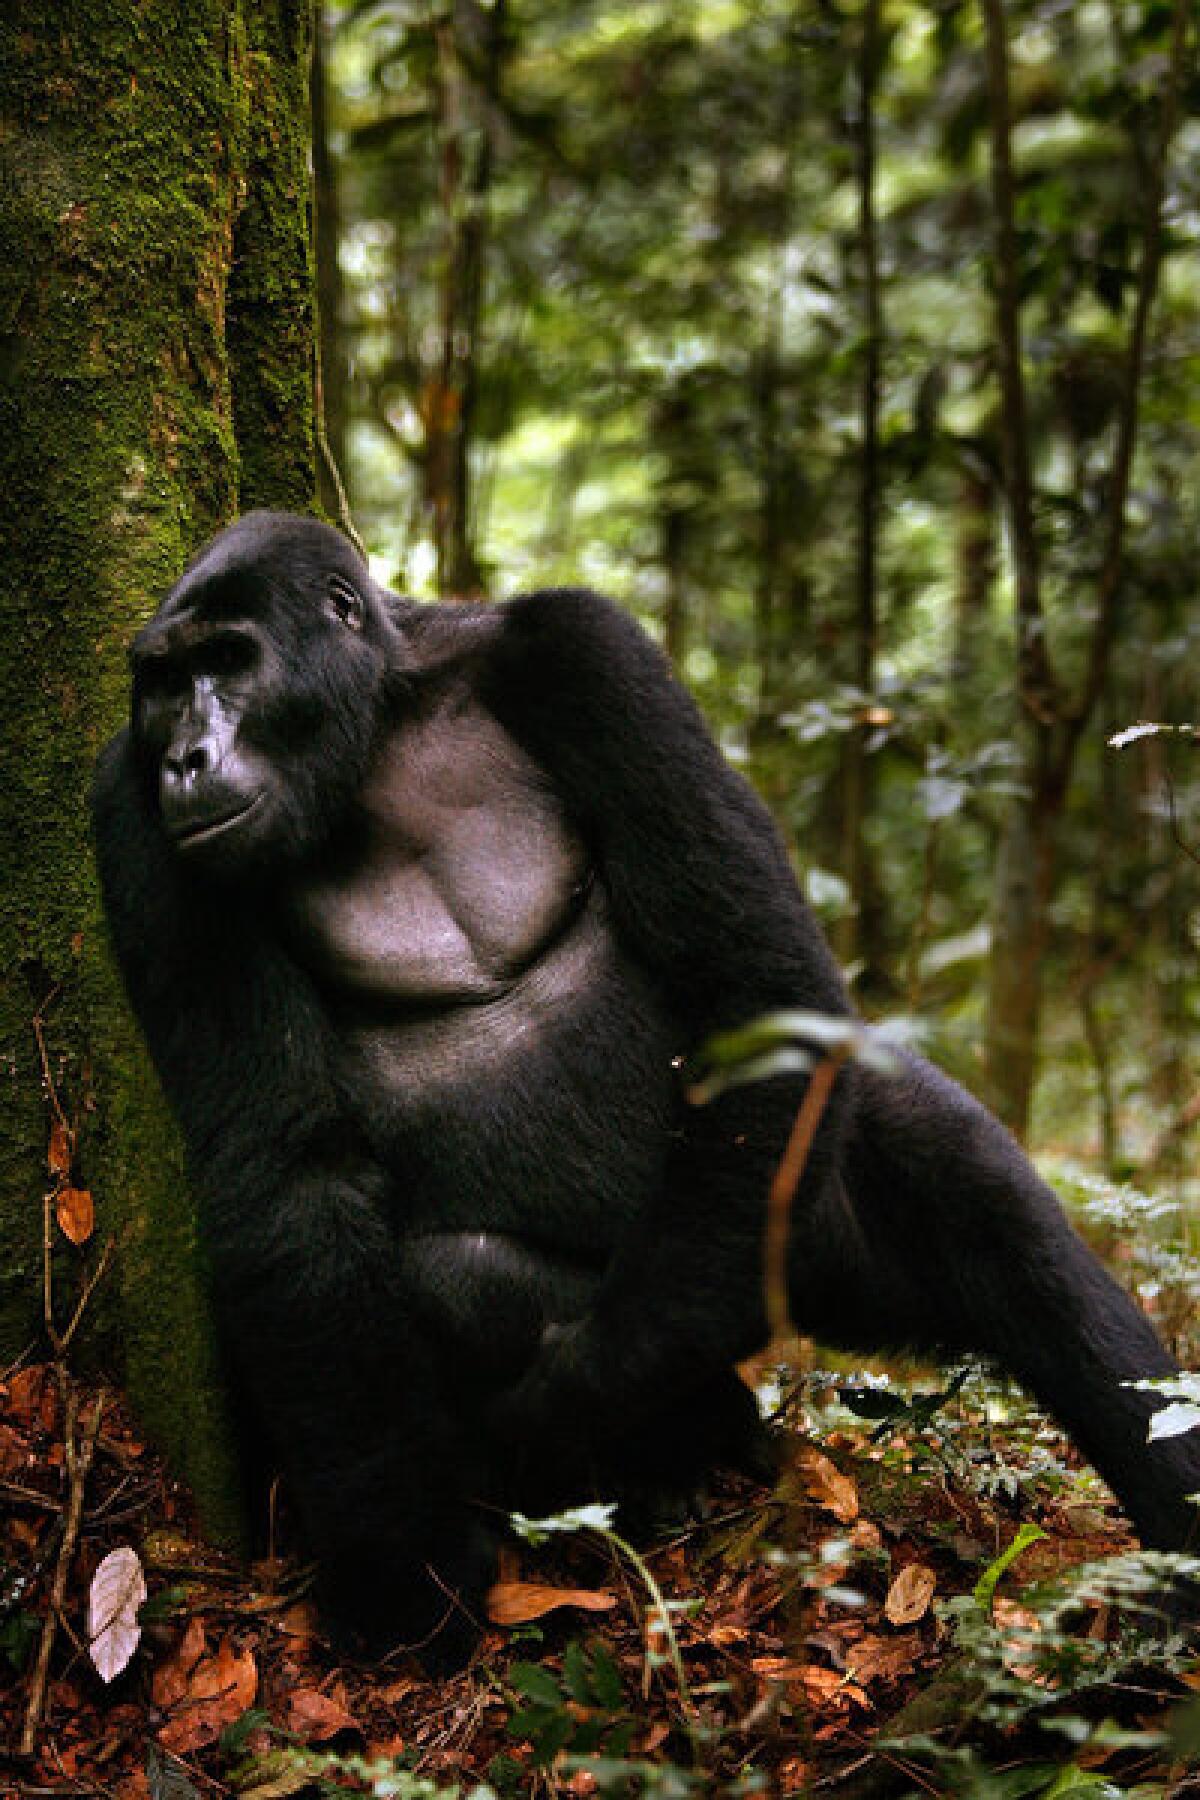 Fewer than 800 mountain gorillas remain on Earth. More than a third live in Bwindi Impenetrable National Park, providing Uganda a major source of tourist dollars. Besides suffering loss of habitat, the gorillas are threatened by new ailments, such as measles and scabies, picked up from people who live around the park. Gorillas and humans are close genetic cousins, sharing 98% of their DNA.